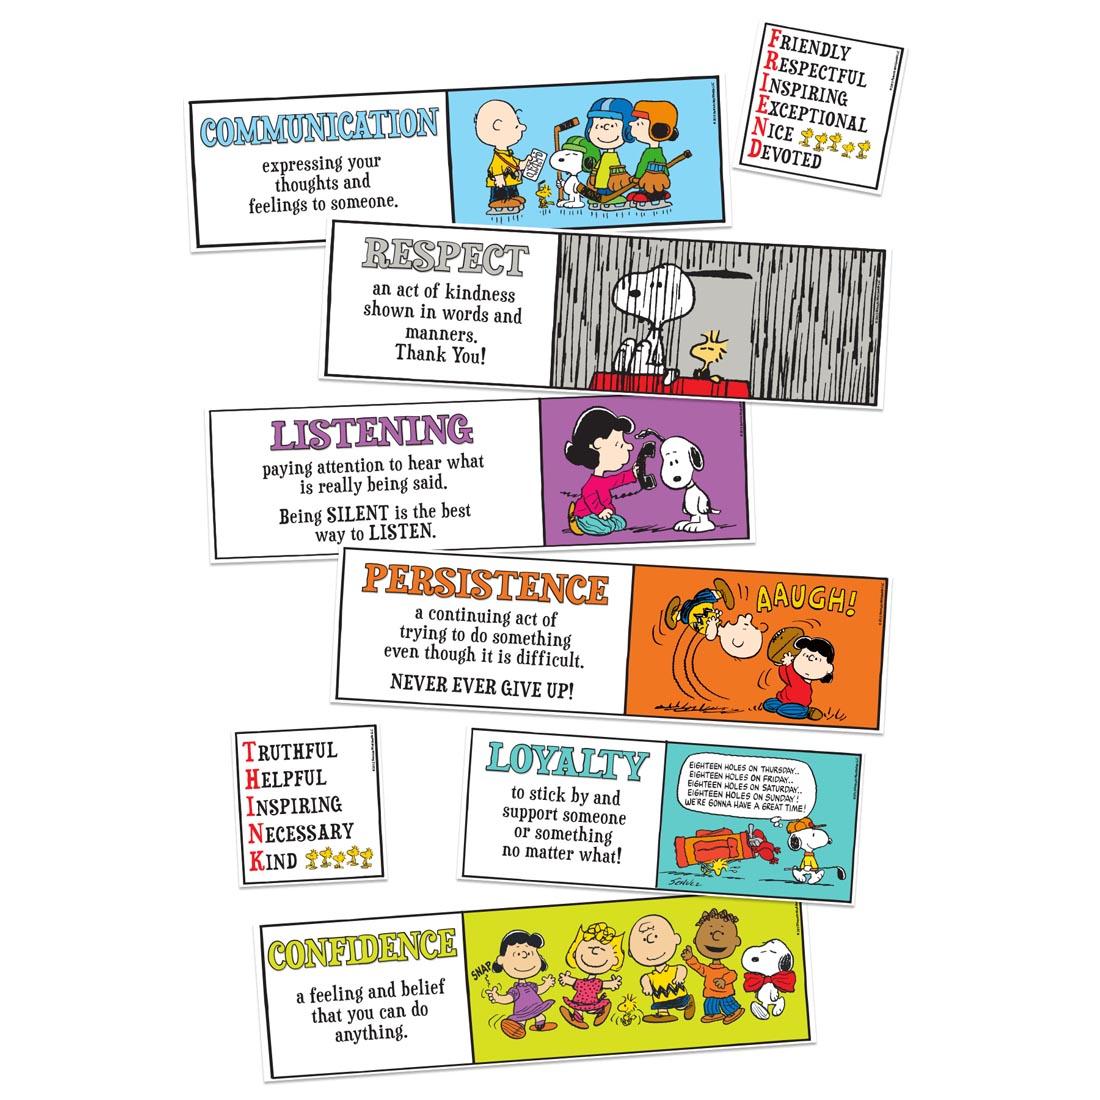 Peanuts Character Building Mini Bulletin Board Set by Eureka includes message about Communication, Respect, Listening, Persistence, Loyalty and Confidence